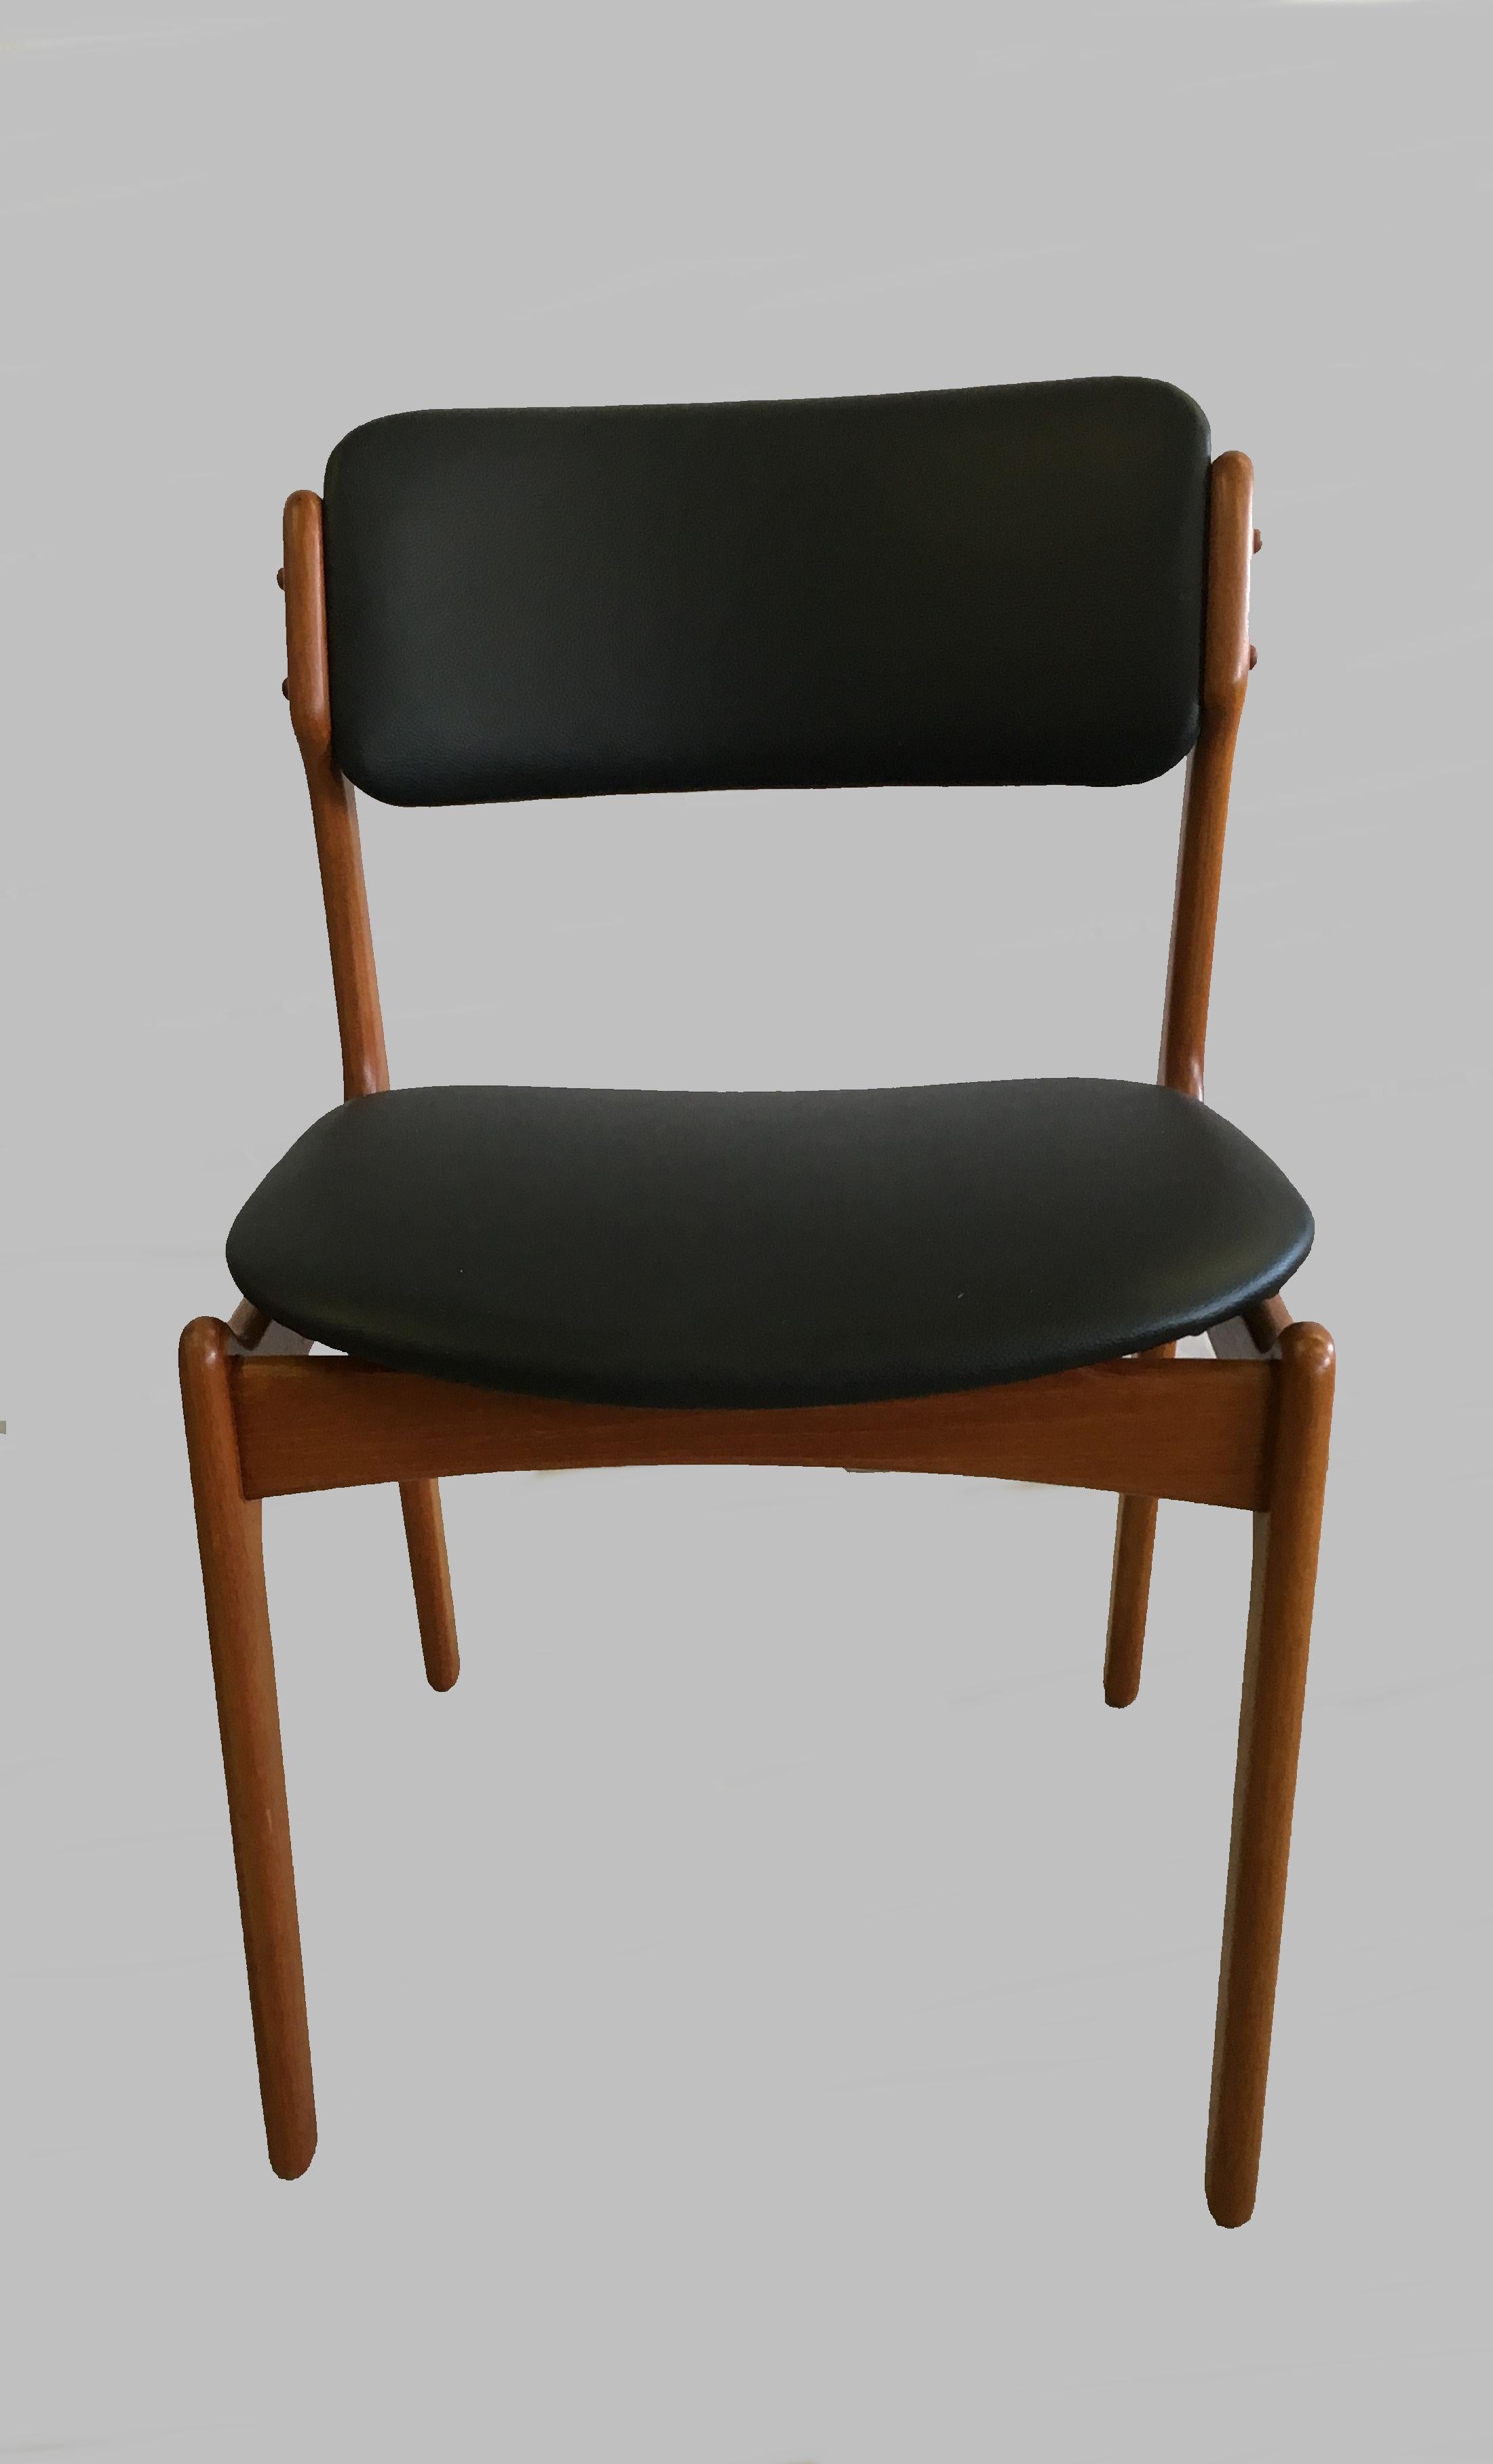 1960s set of six teak dining chairs with floating seat designed by Erik Buch for Oddense Maskinsnedkeri in 1949.

The chairs have a simple yet solid construction with elegant lines and provide a very comfortable seating experience on the elegant